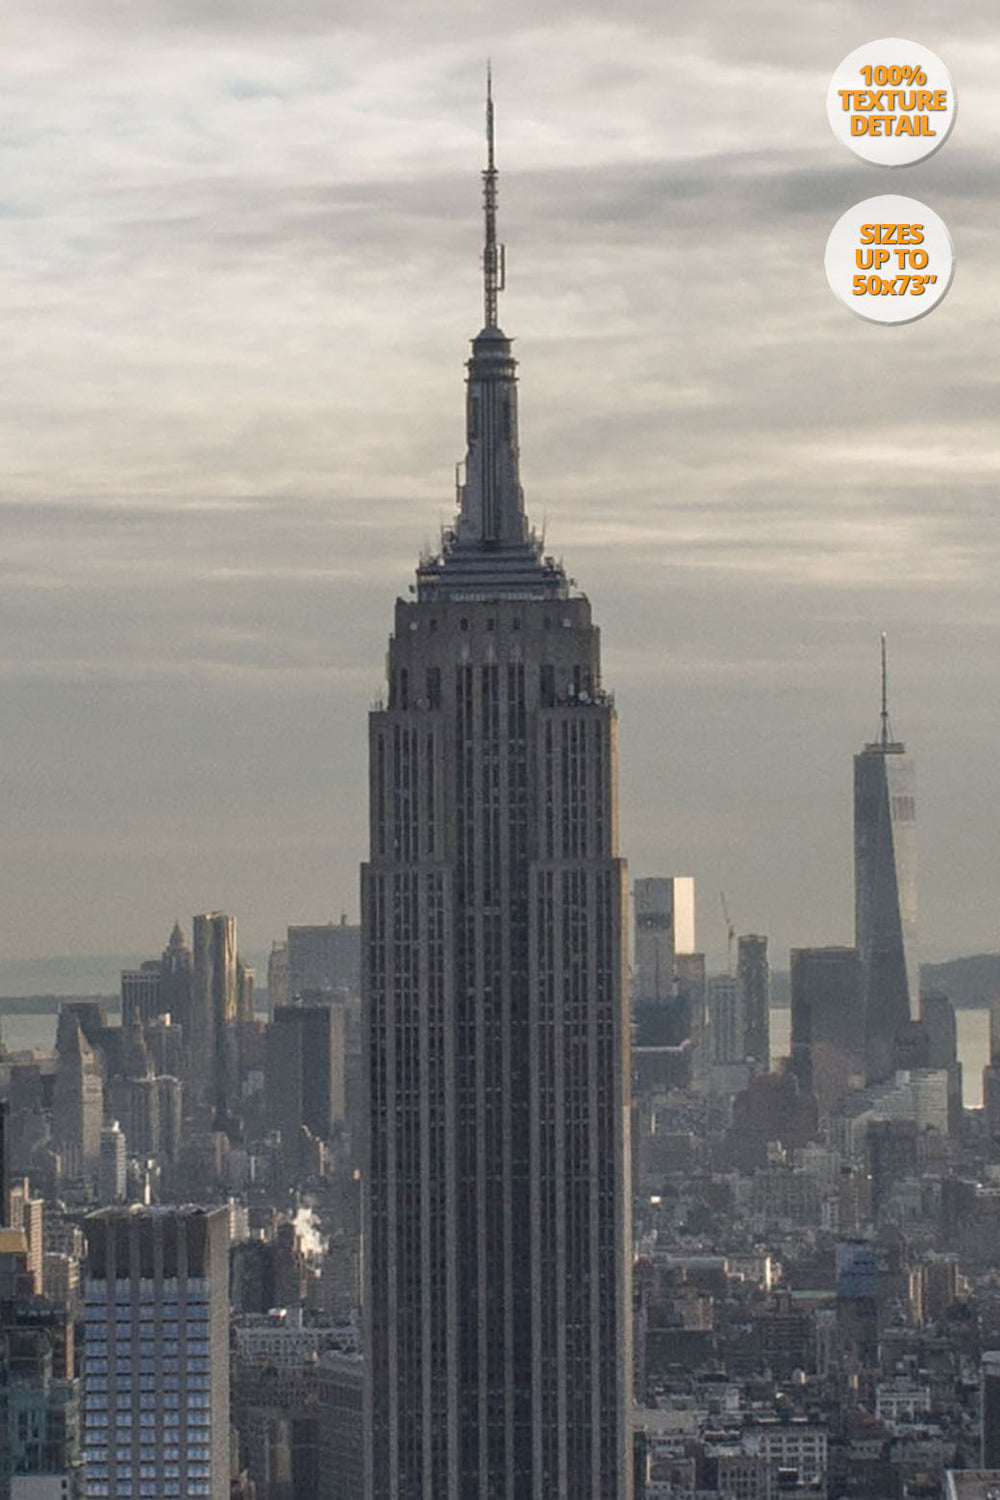 The Empire State Building before sunset, Midtown Manhattan, US. | Giant Print Detail at 100% magnification.